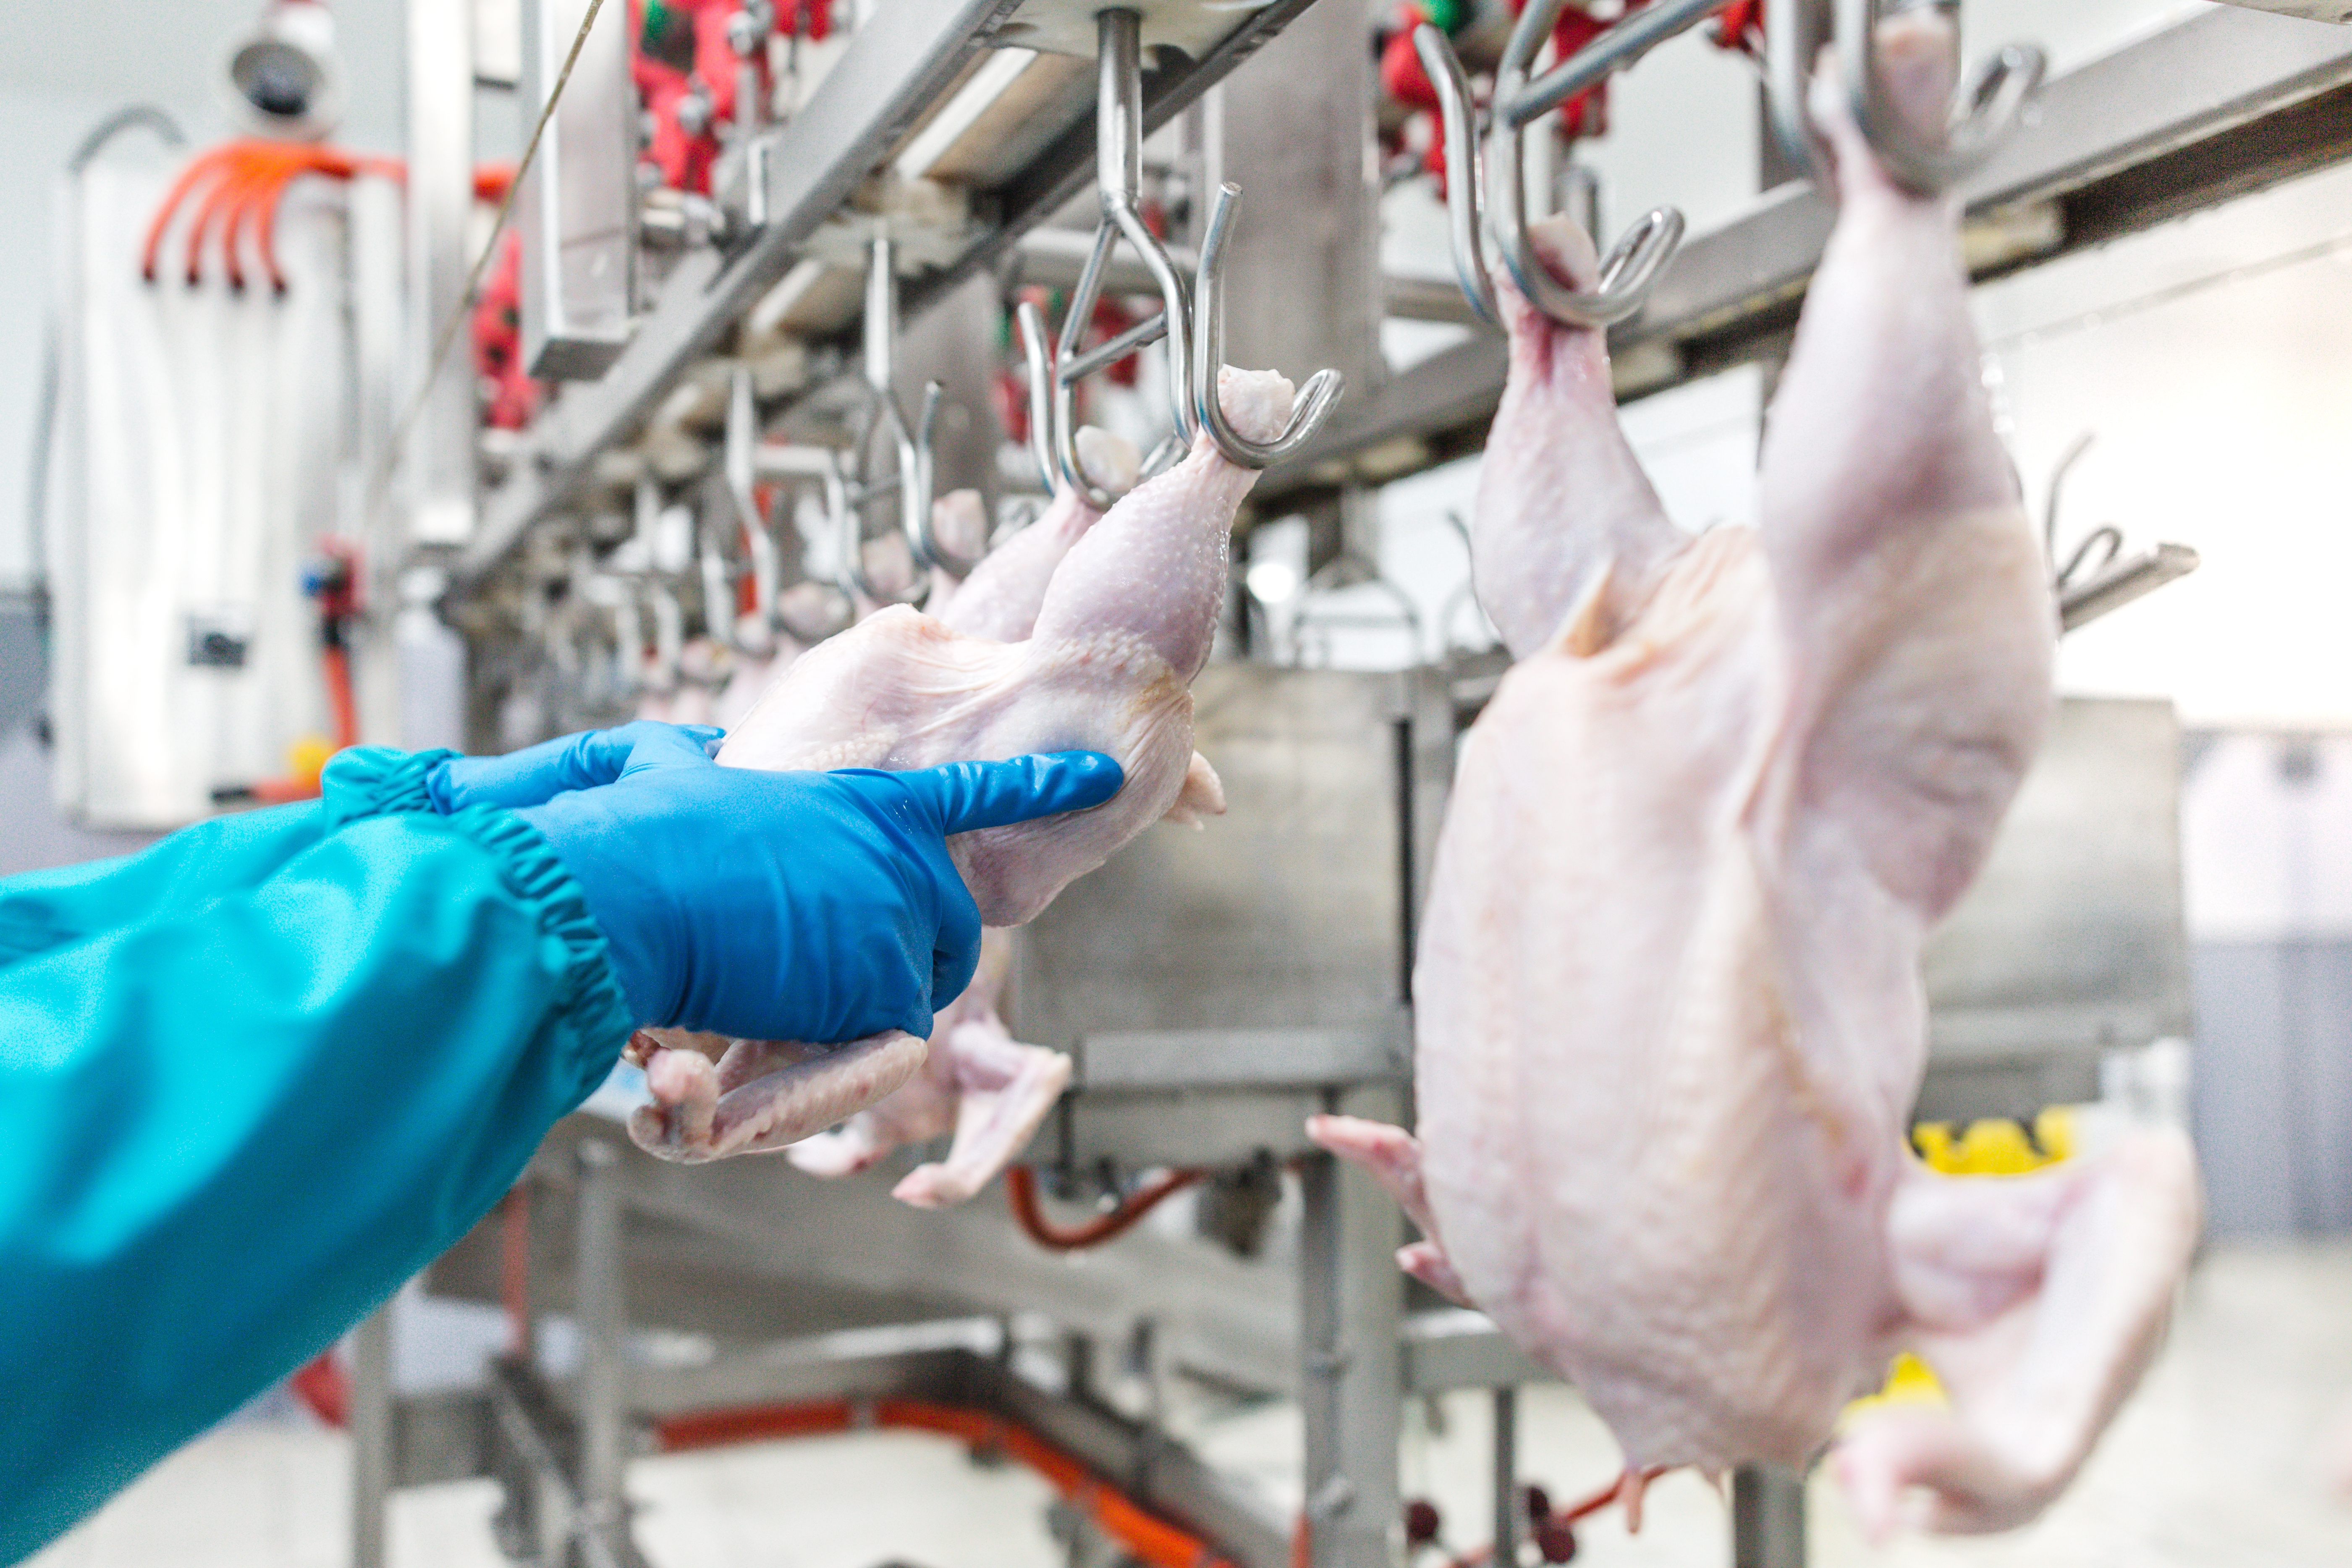 Worker attaching poultry carcasses to a conveyer belt for processing